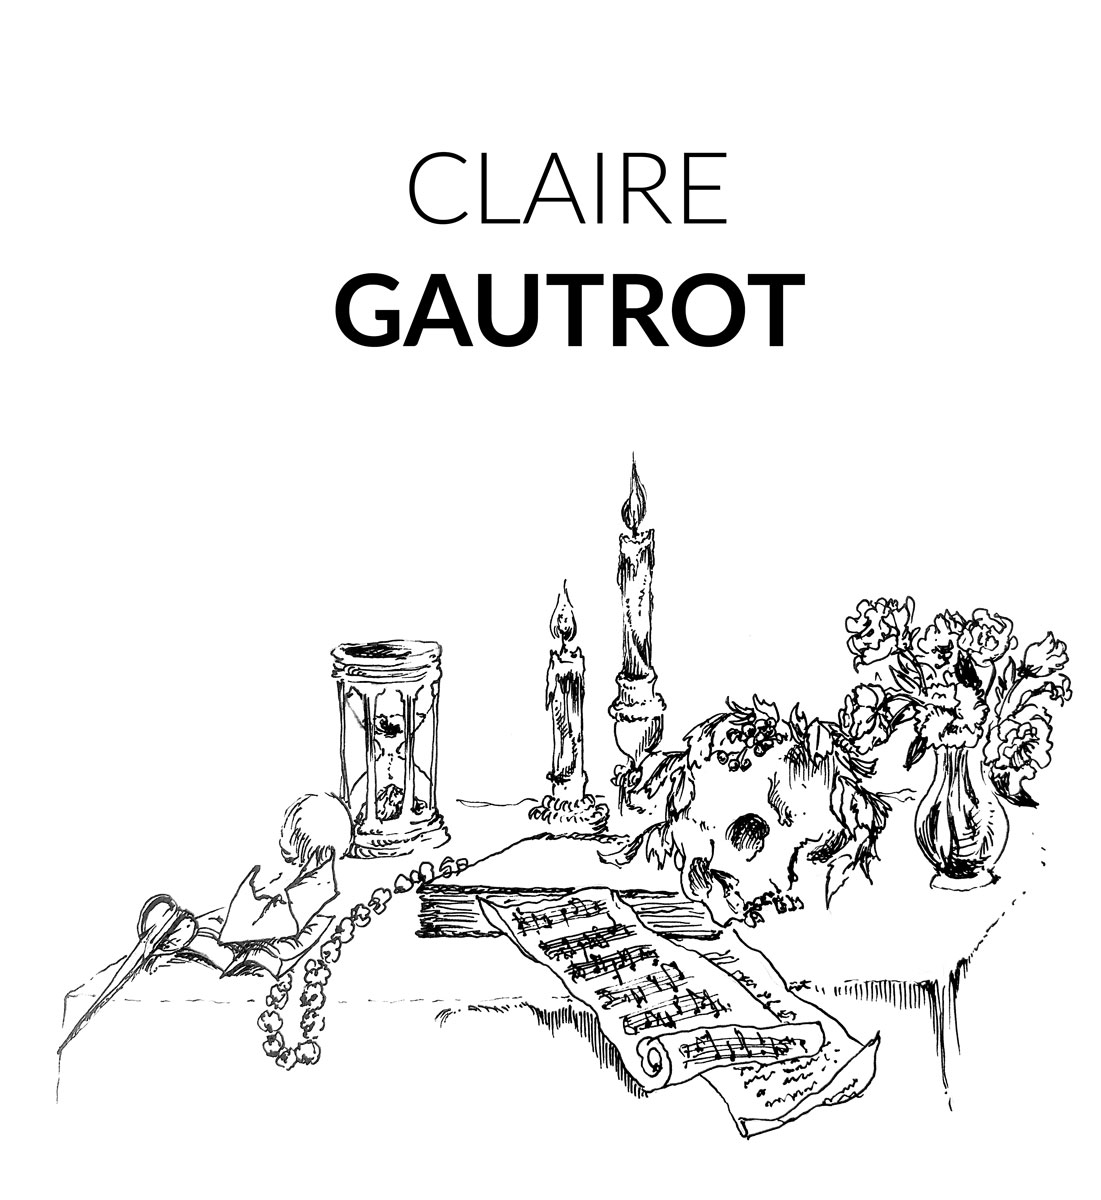 Claire Gautrot